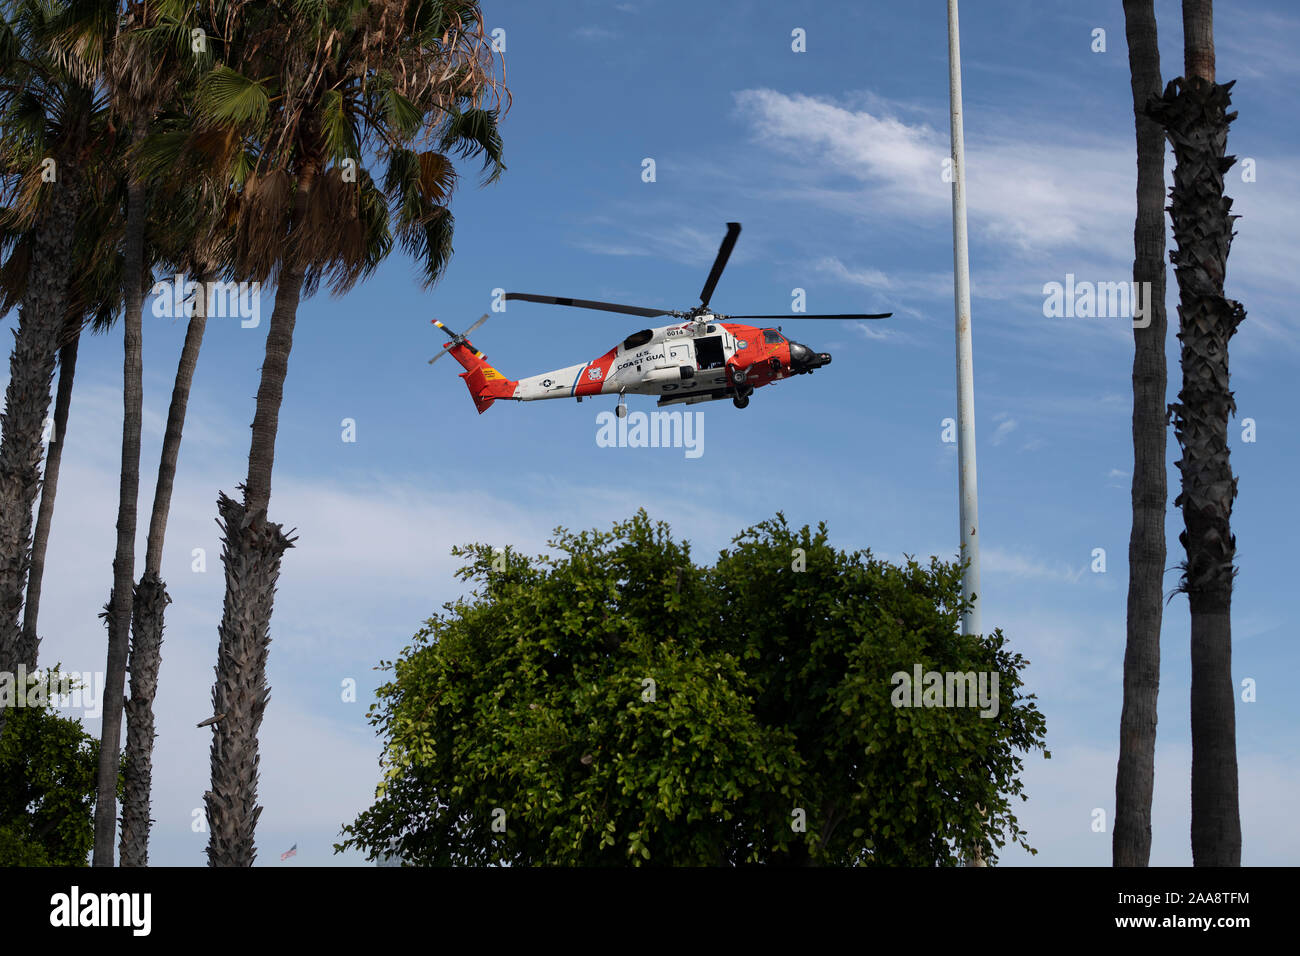 Coast Guard Helicopter landing in a metropolitian area Stock Photo